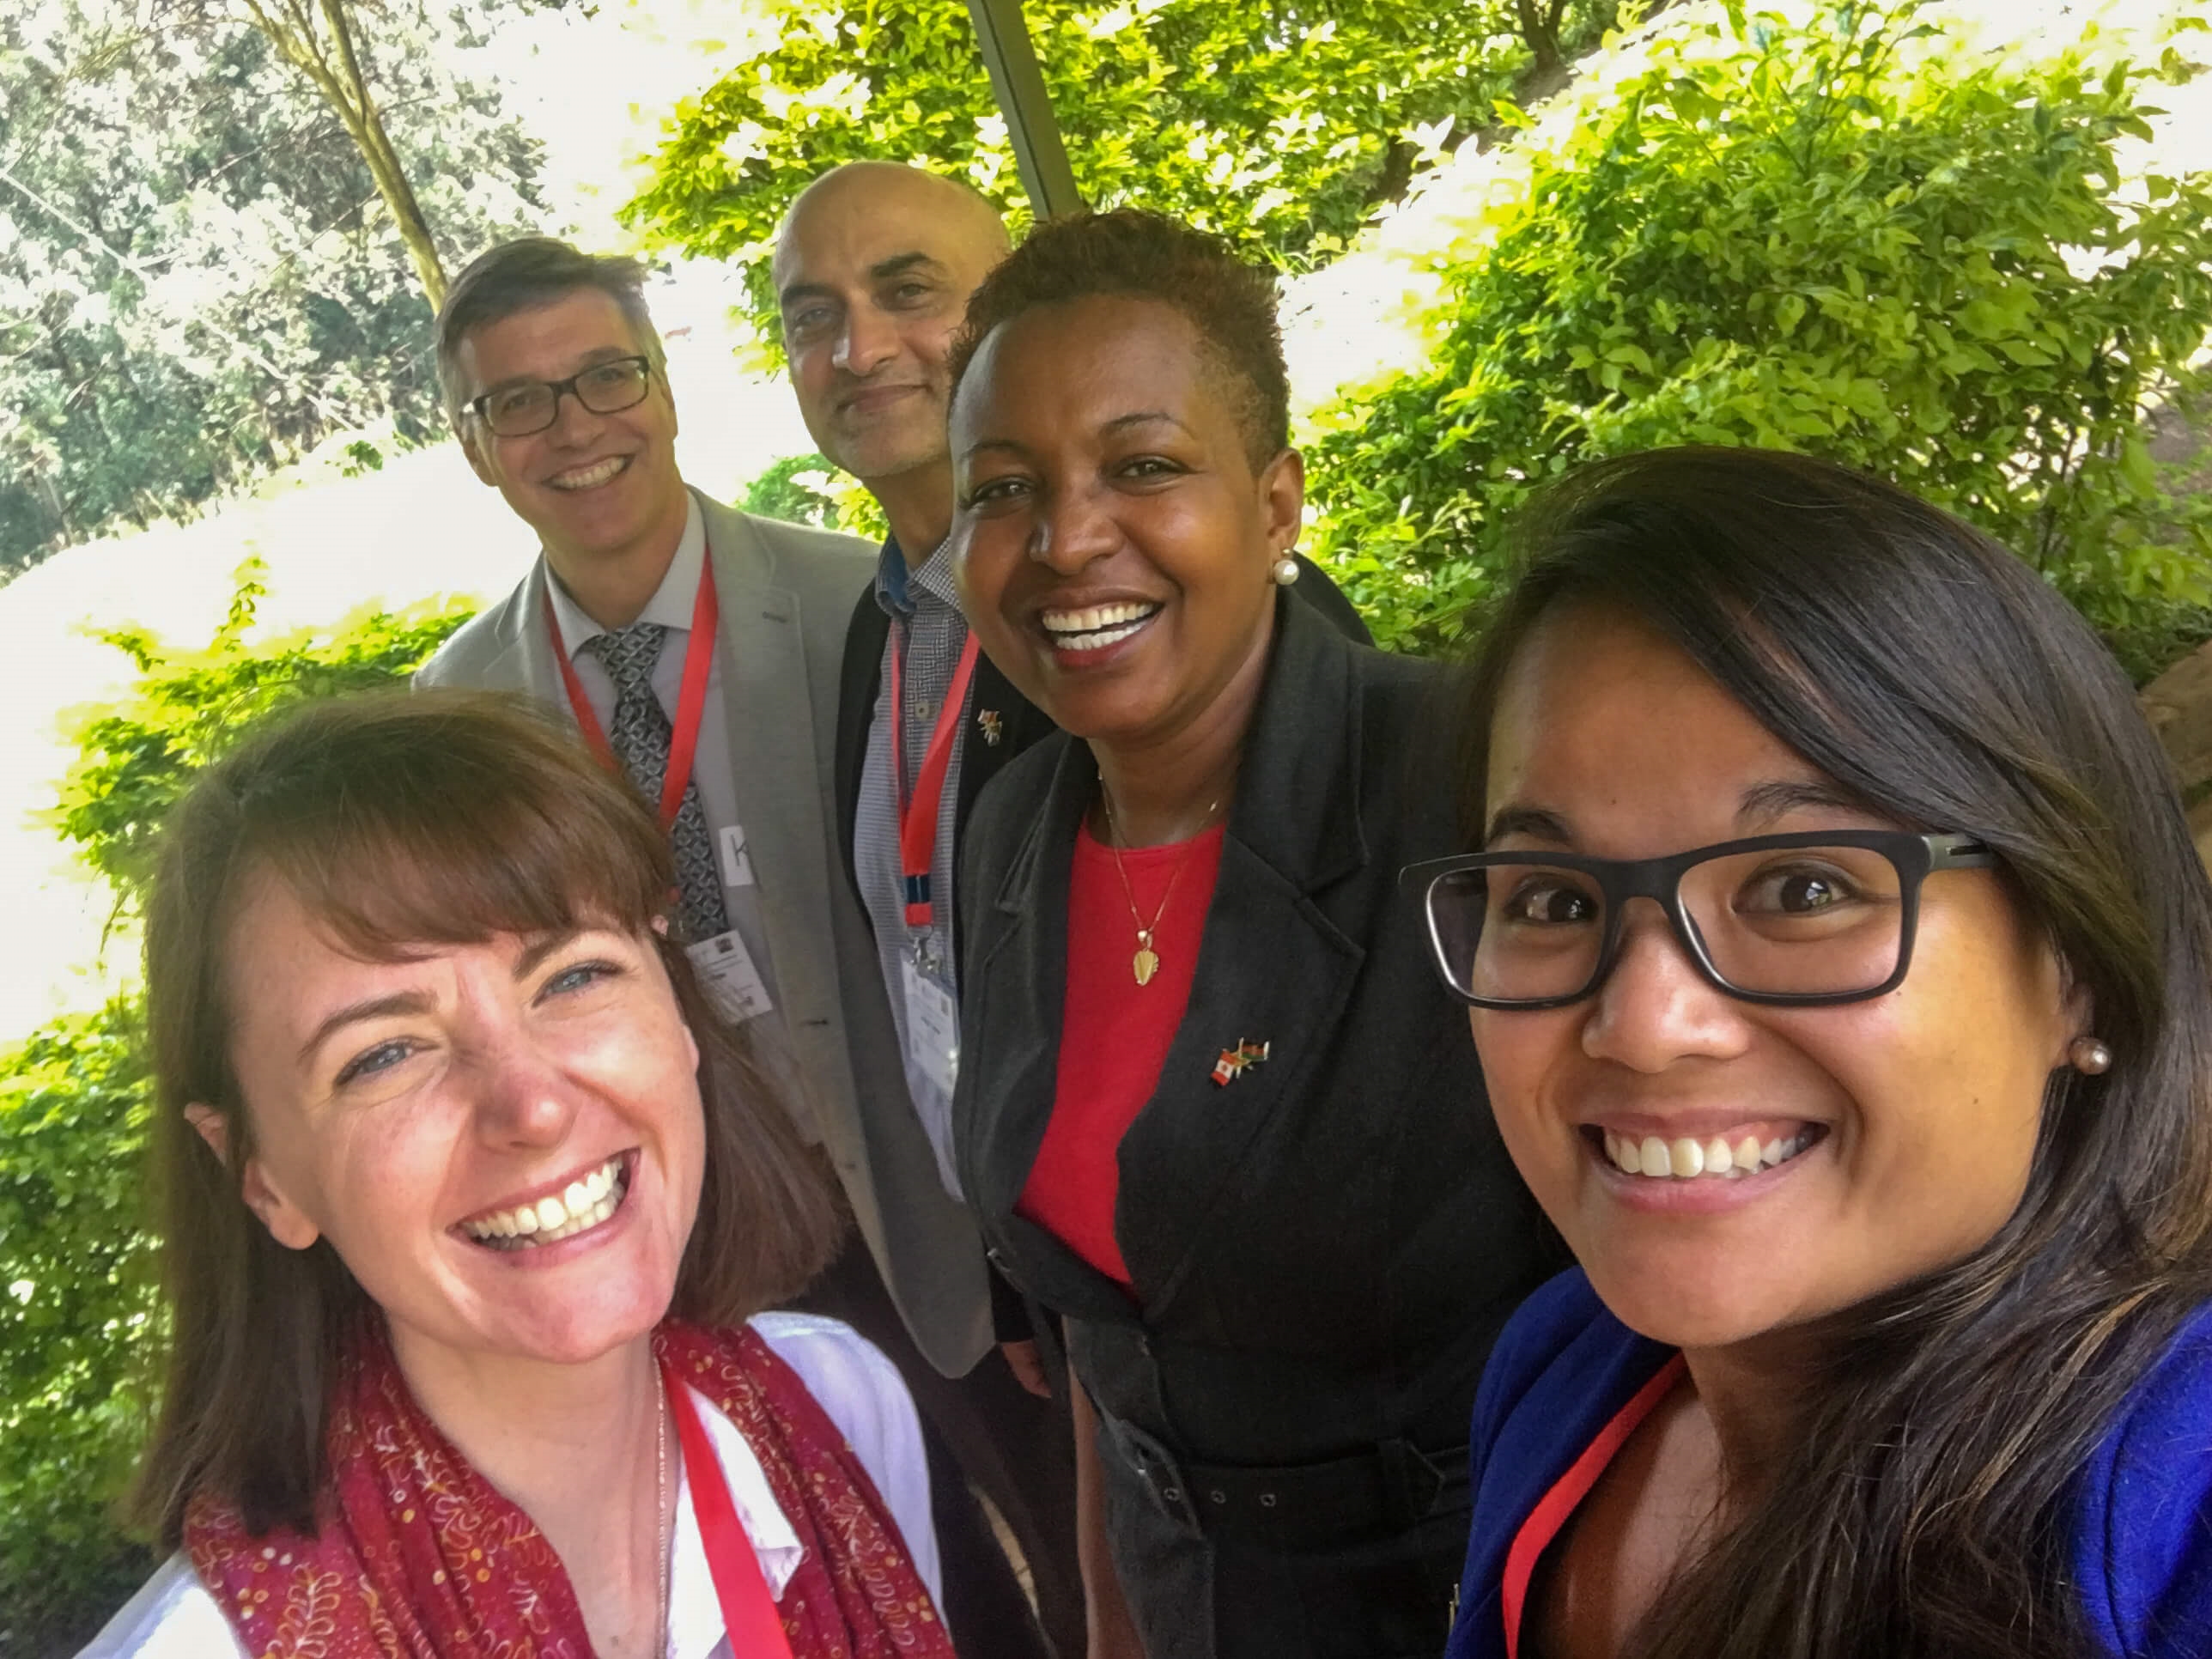 Kevin Pitts (the Teaching & Learning Centre), Azhar Laher (School of Leadership and Human Resources), Beth Martin (College of the Rockies, British Columbia), Mary Bantug (Seneca International), and Madame Emily Maina (Deputy Director, Ministry of Education, Kenya)